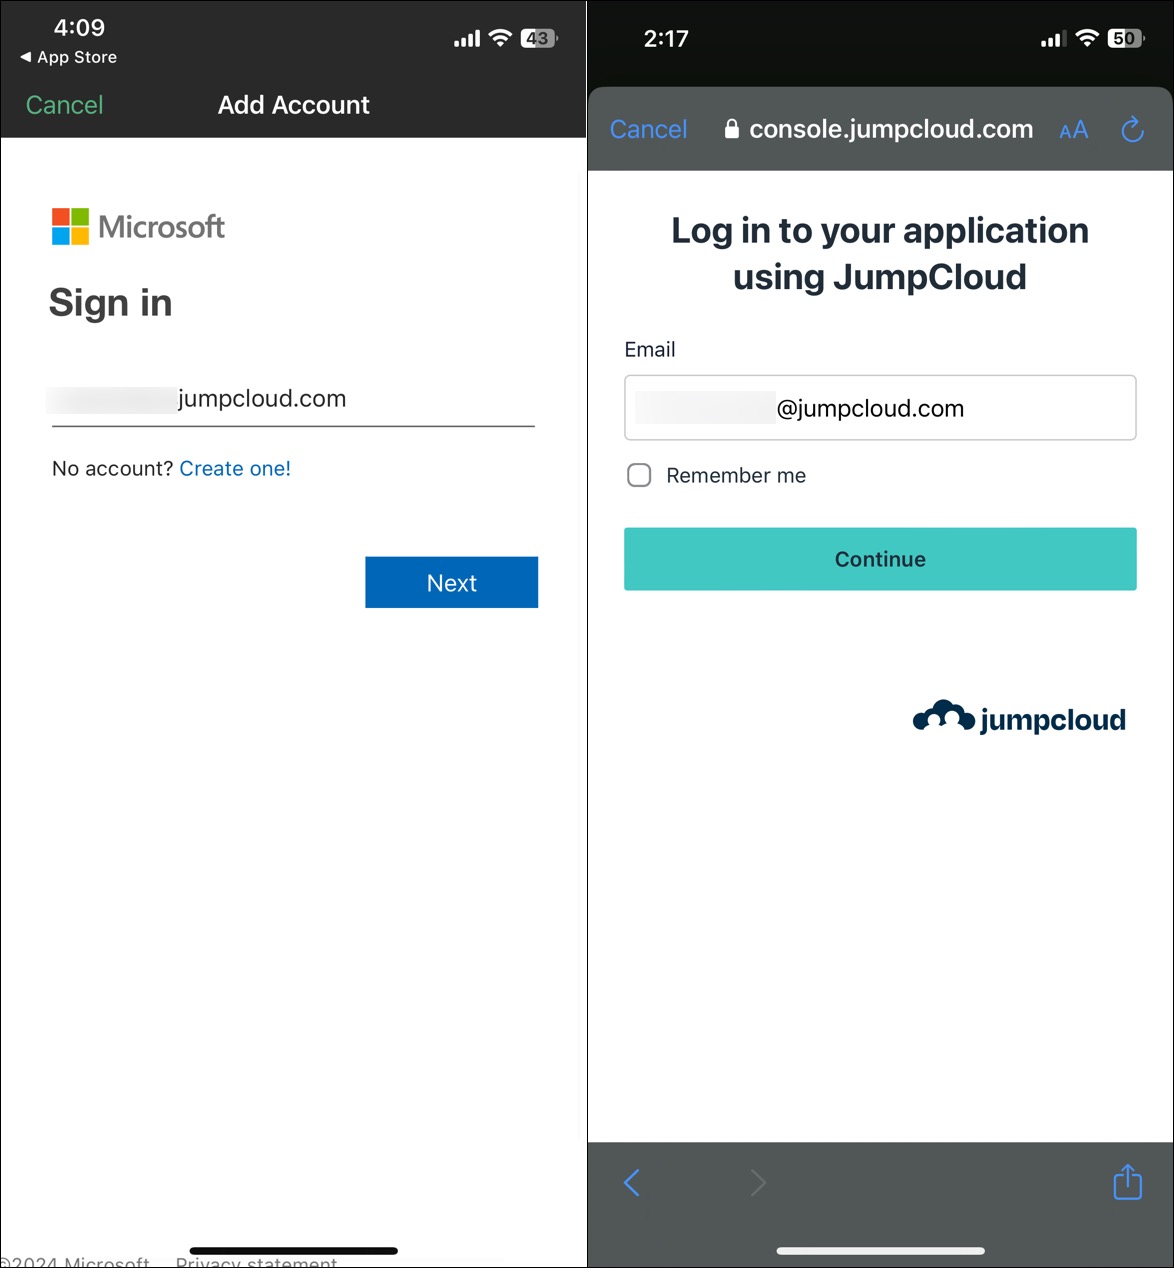 Redirected to JumpCloud SSO to sign in to O365 application on mobile (iOS).